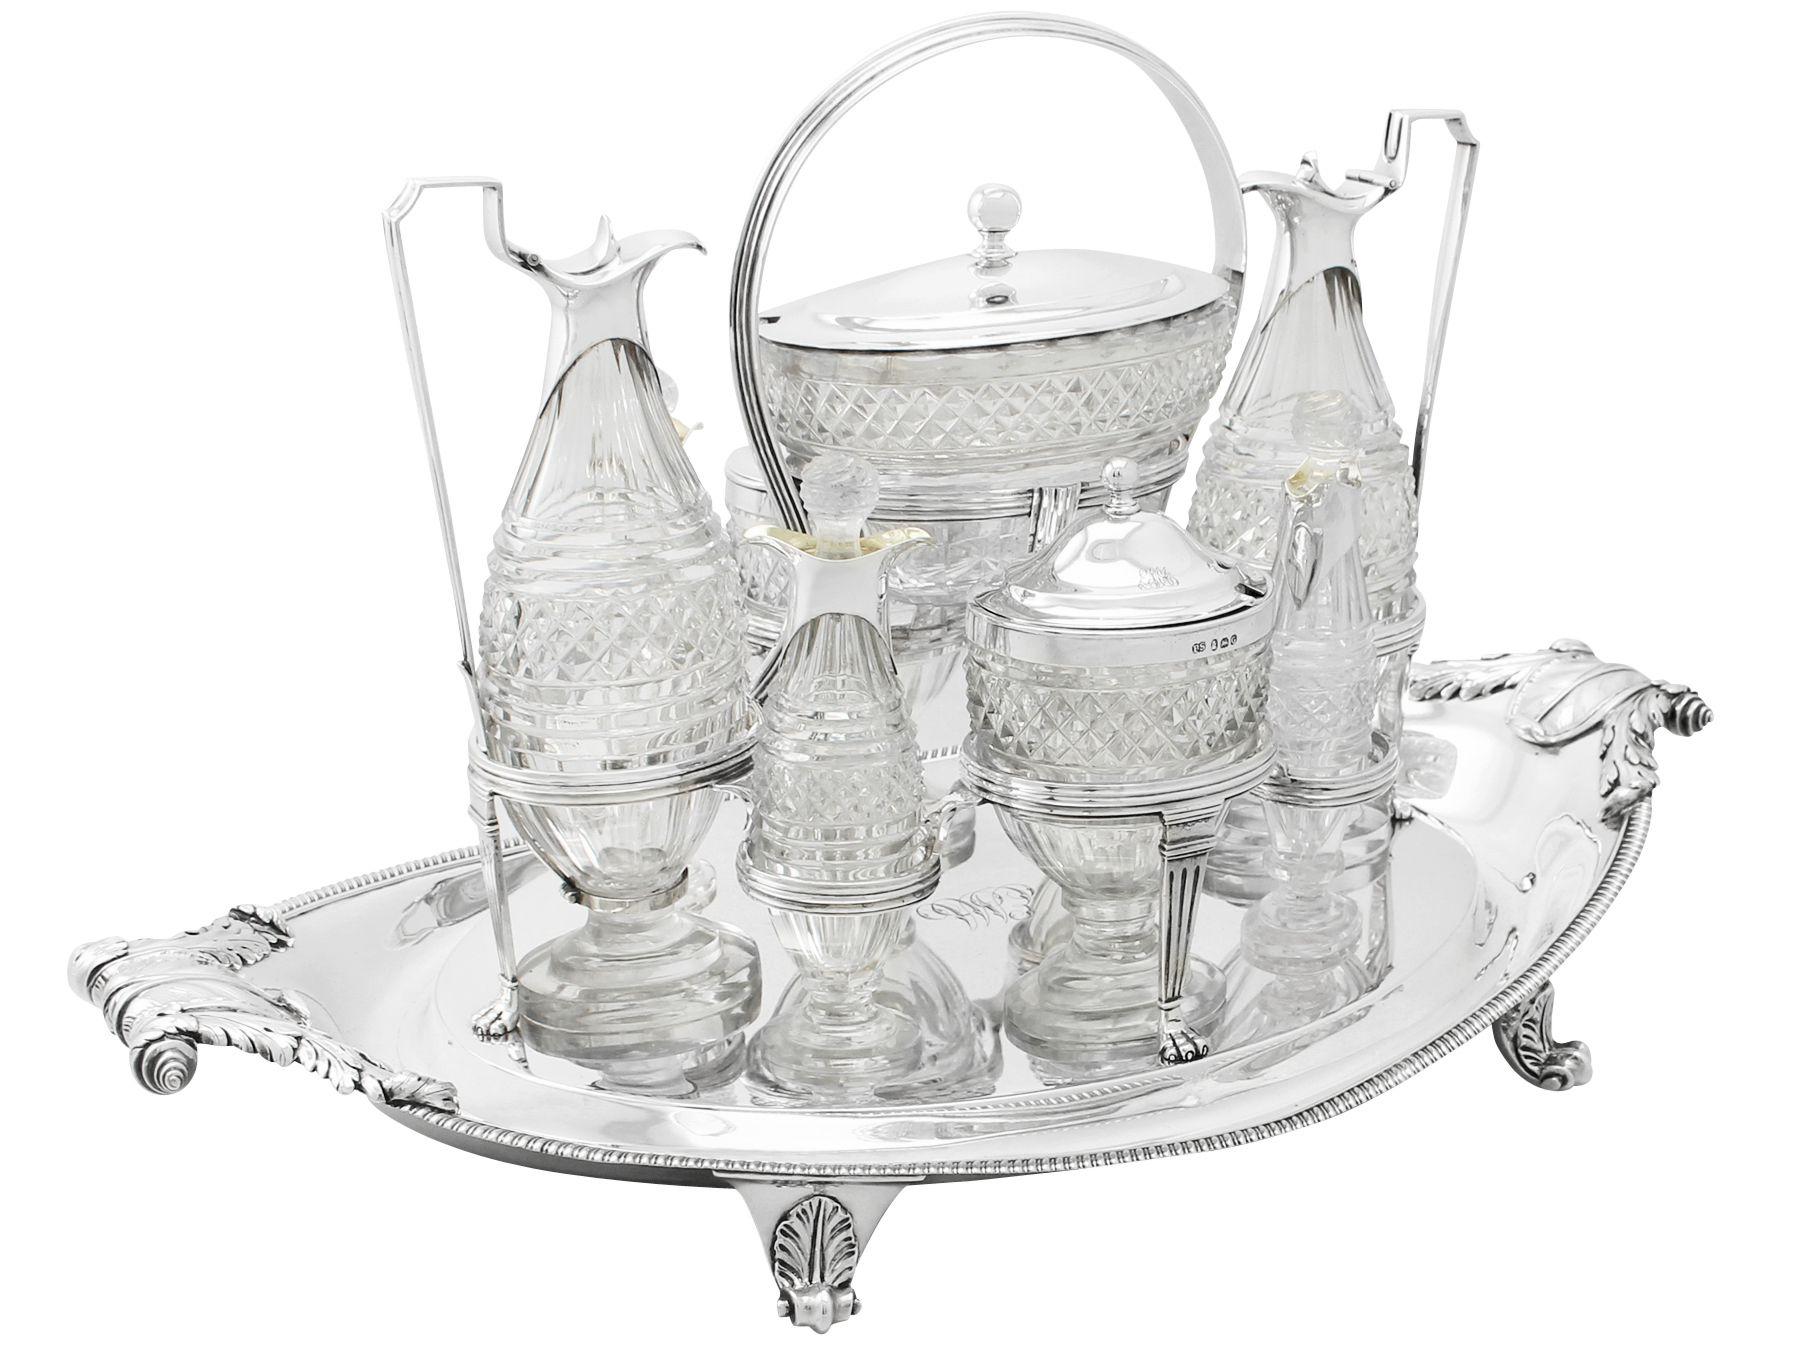 English Antique Sterling Silver and Cut Glass Cruet Service by Paul Storr  For Sale